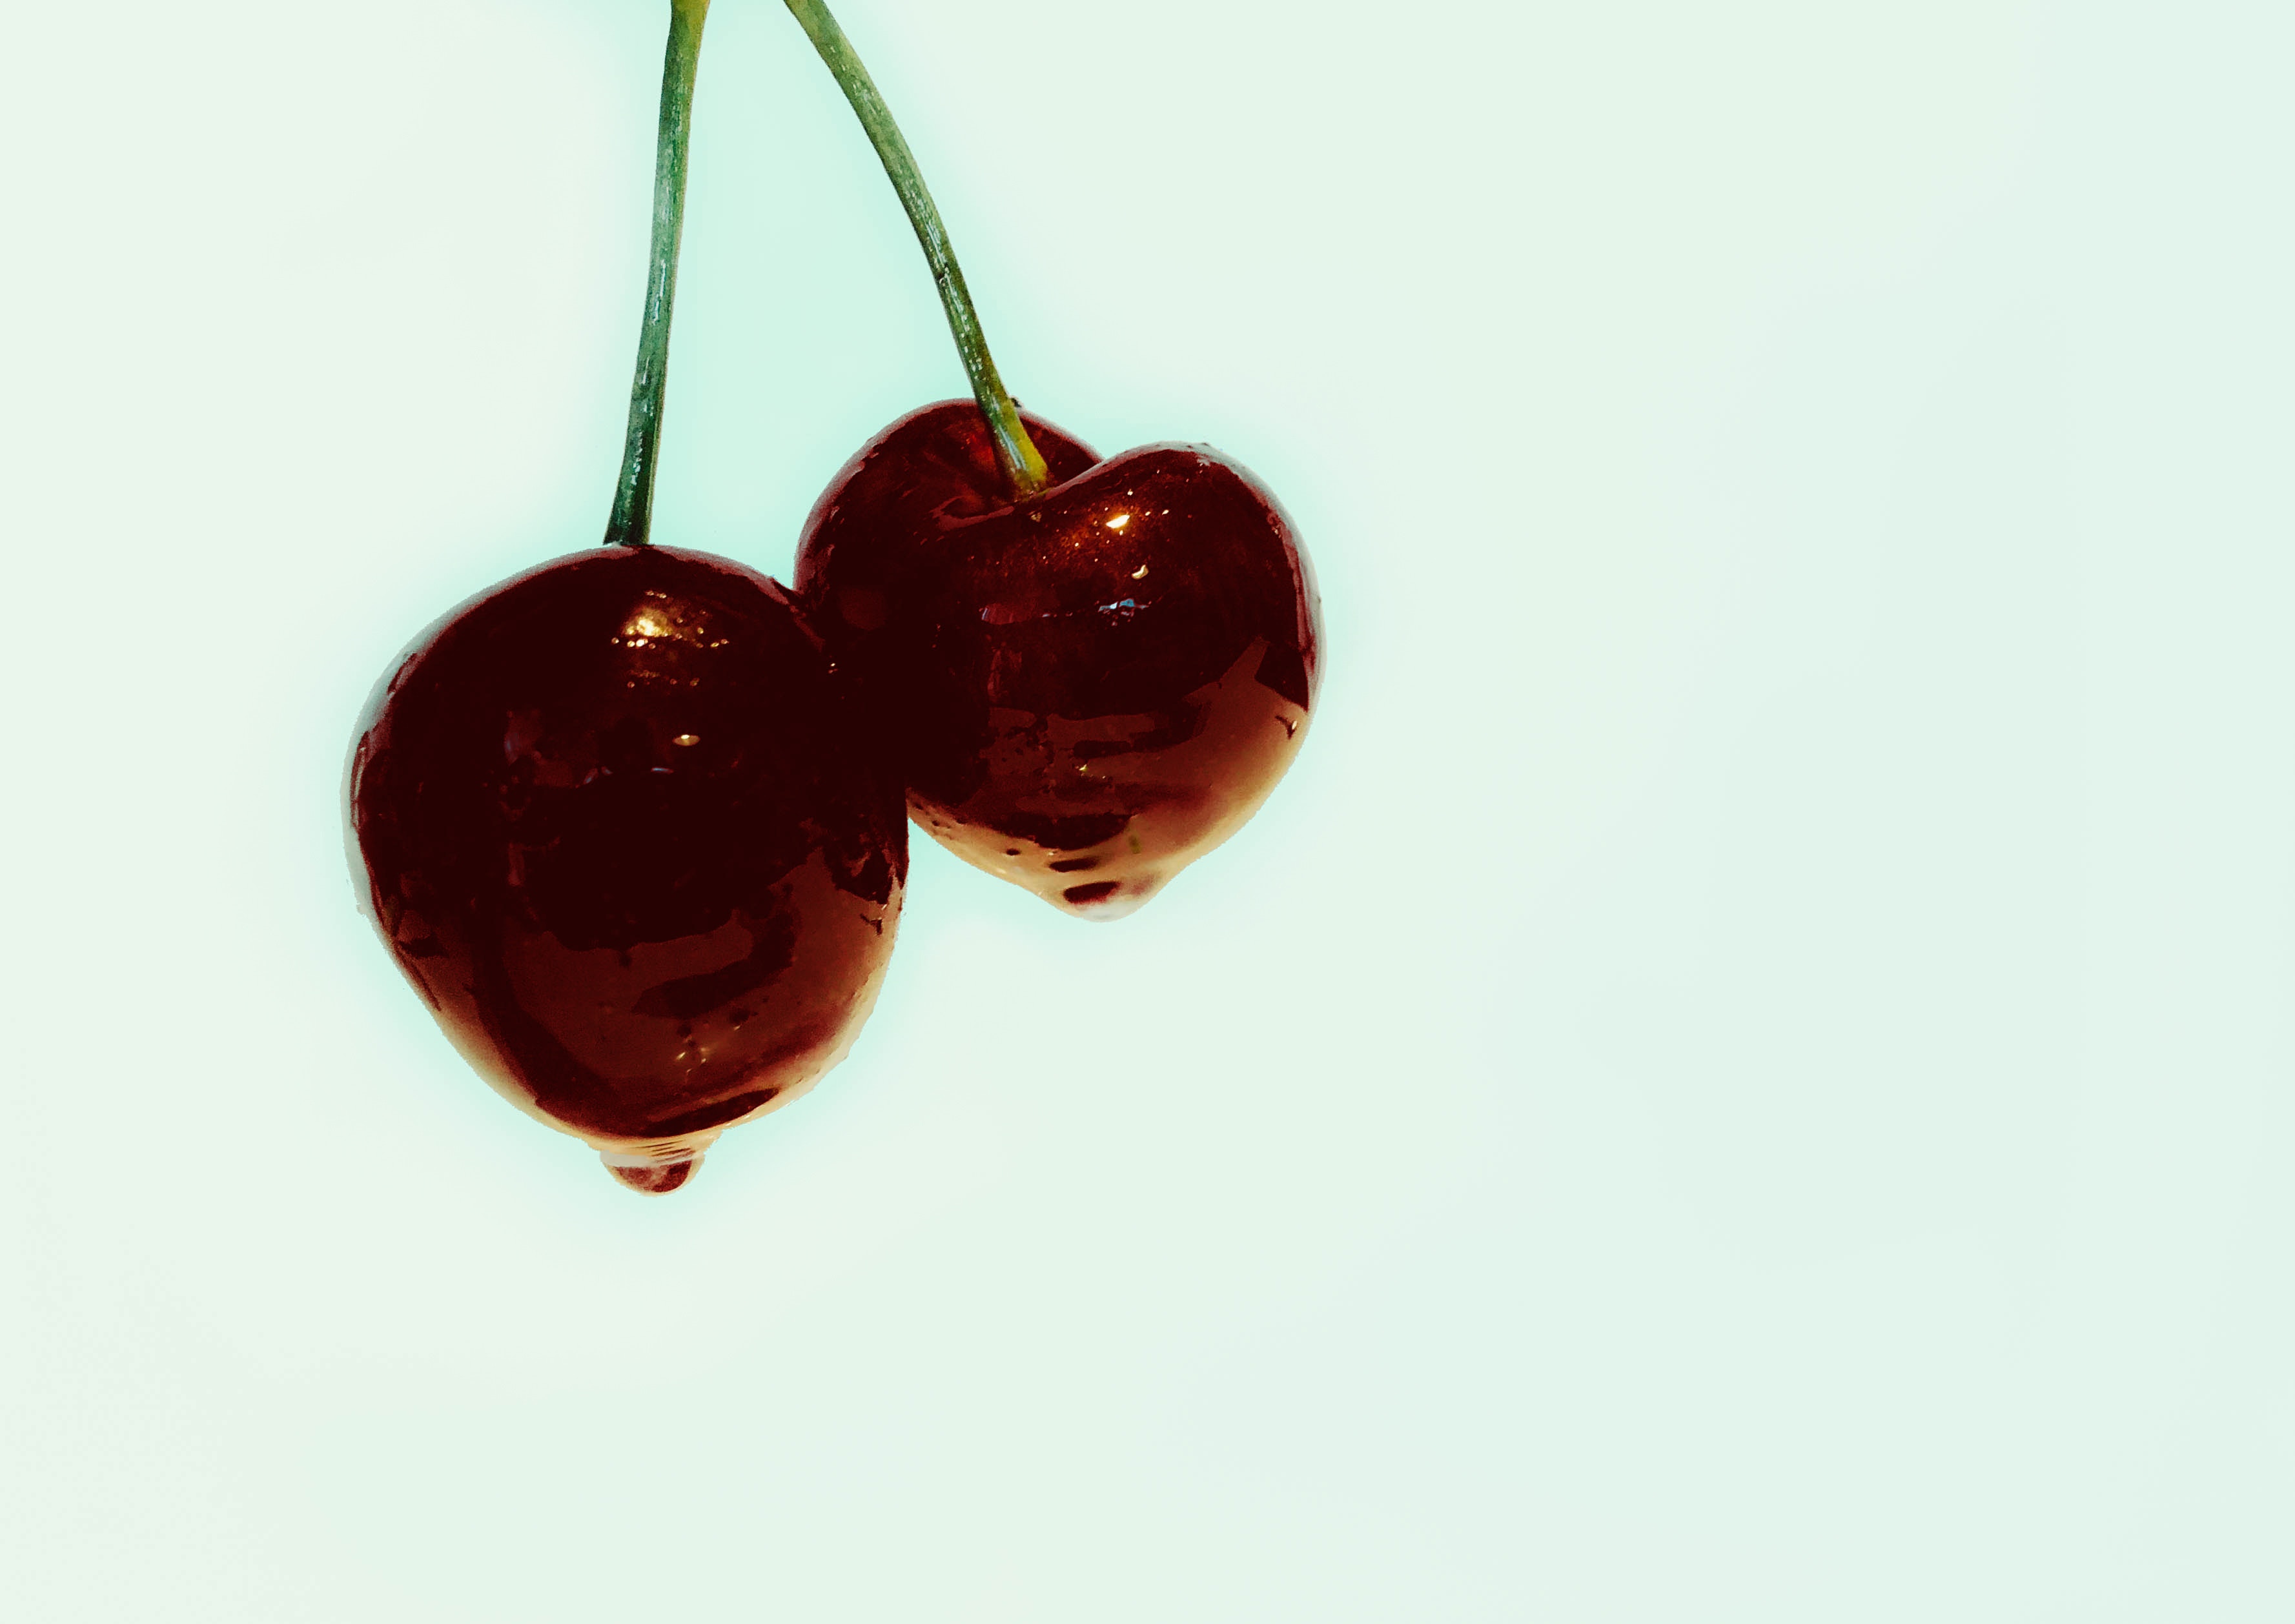 Cherries that also look suggestive